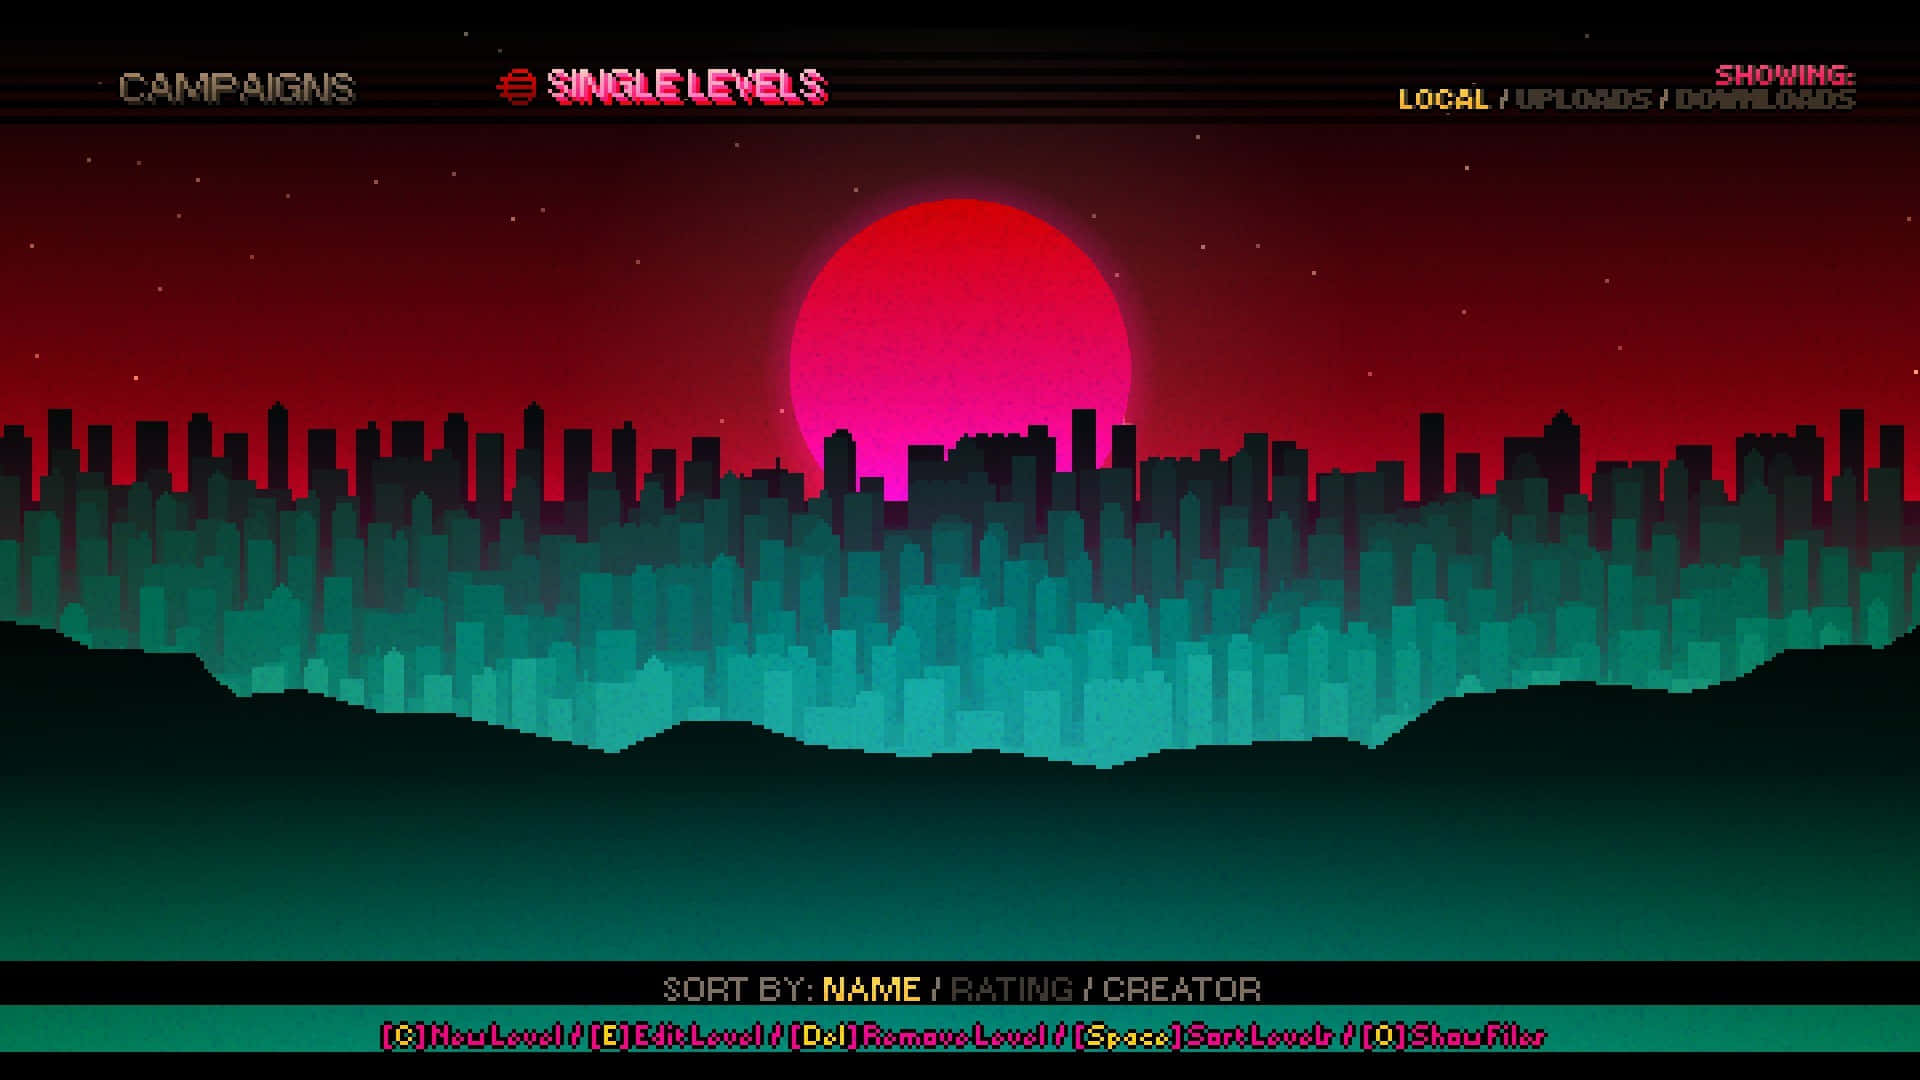 Intense action-packed scene from the neon world of Hotline Miami